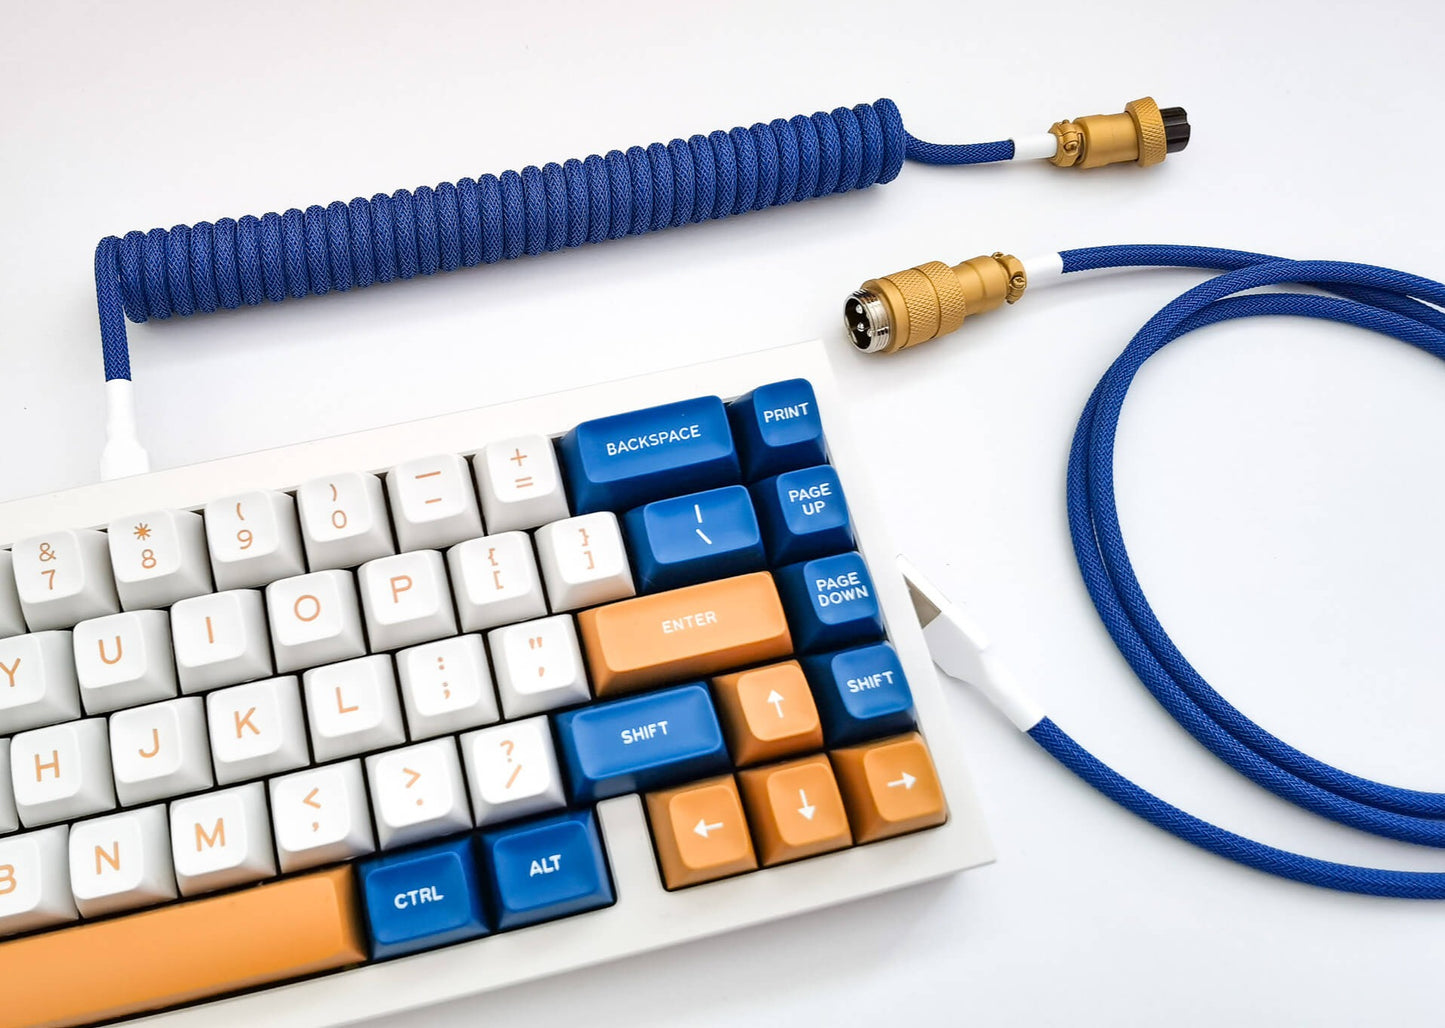 Dream Cable VS Space Cable - Custom Keyboard Cables worth nearly